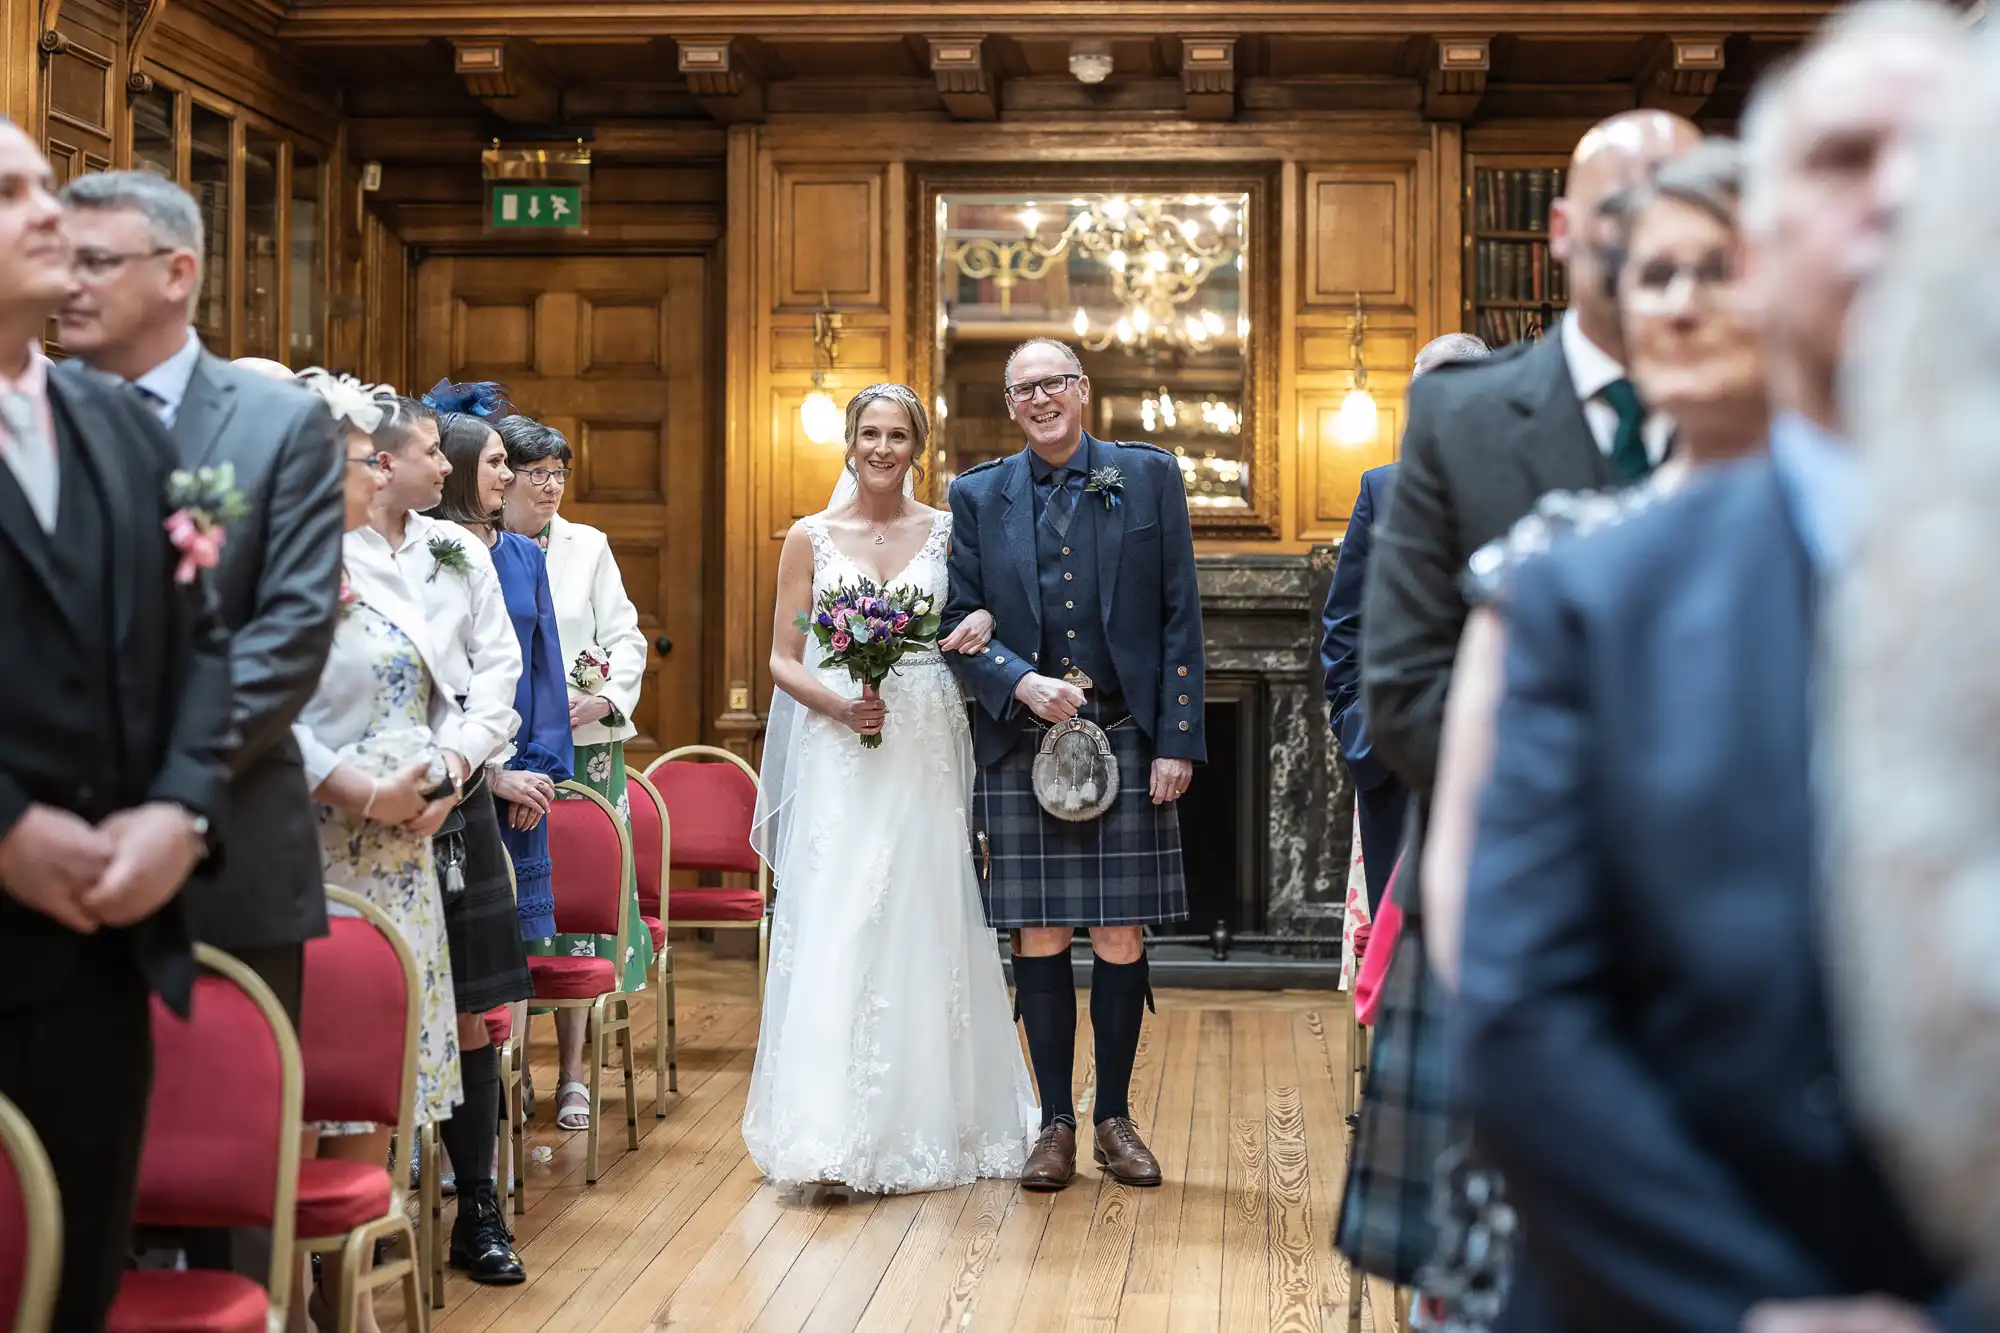 A bride walks down the aisle with a man in traditional Scottish attire, surrounded by seated guests in a wooden-paneled room.